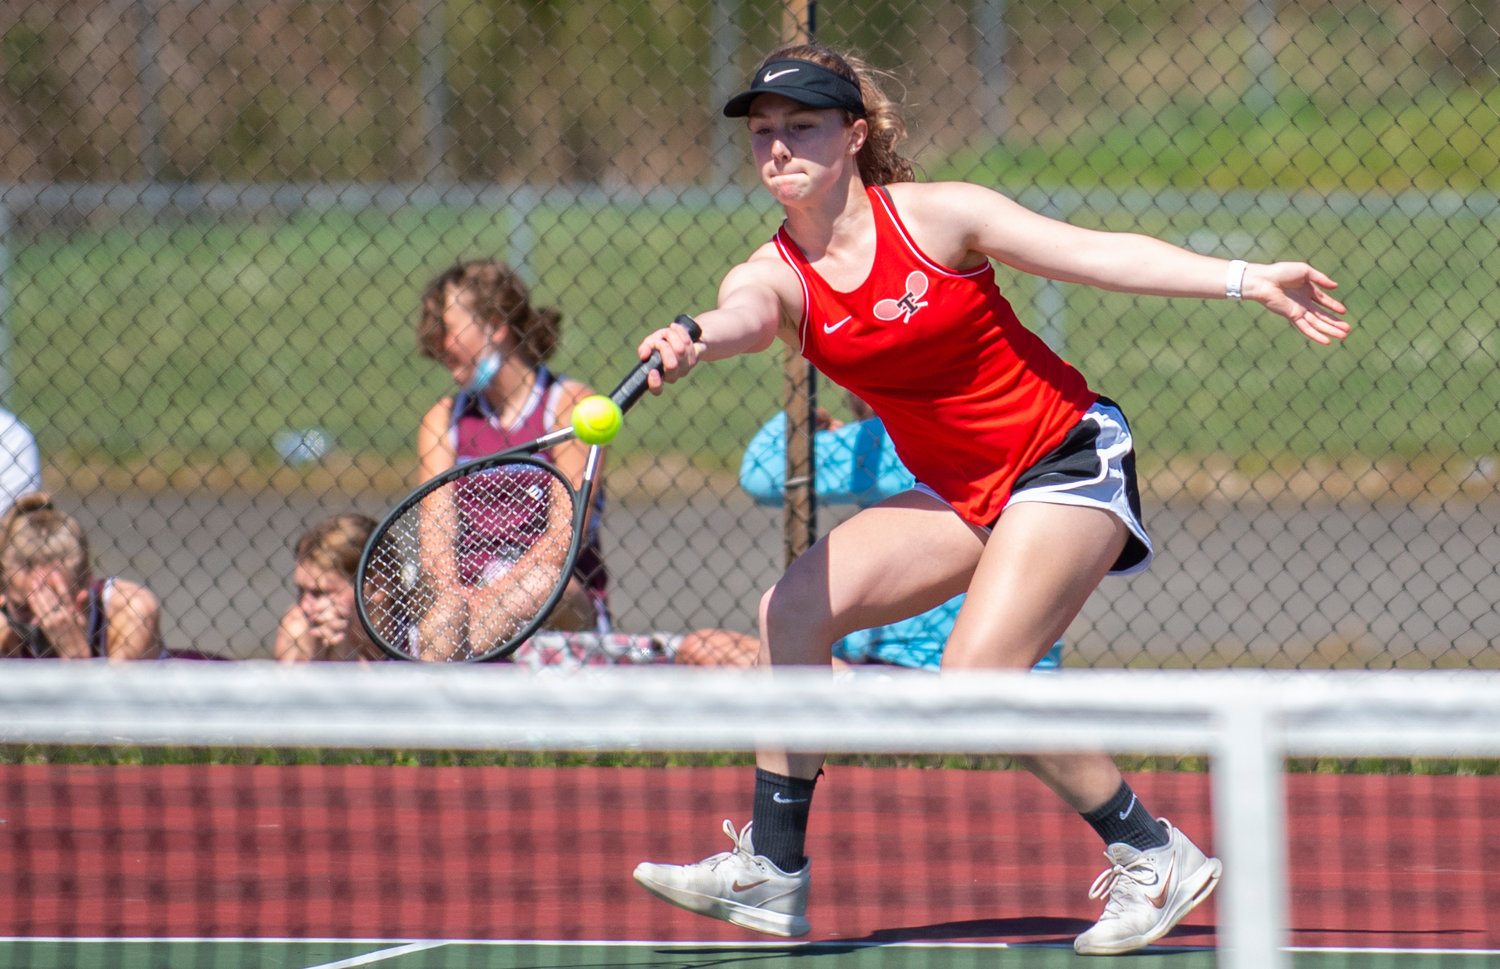 Tenino's Megan Letts battles a Stevenson player in the No. 1 singles match on Saturday in Tenino. Letts won the match, 4-6, 6-0, 6-3.